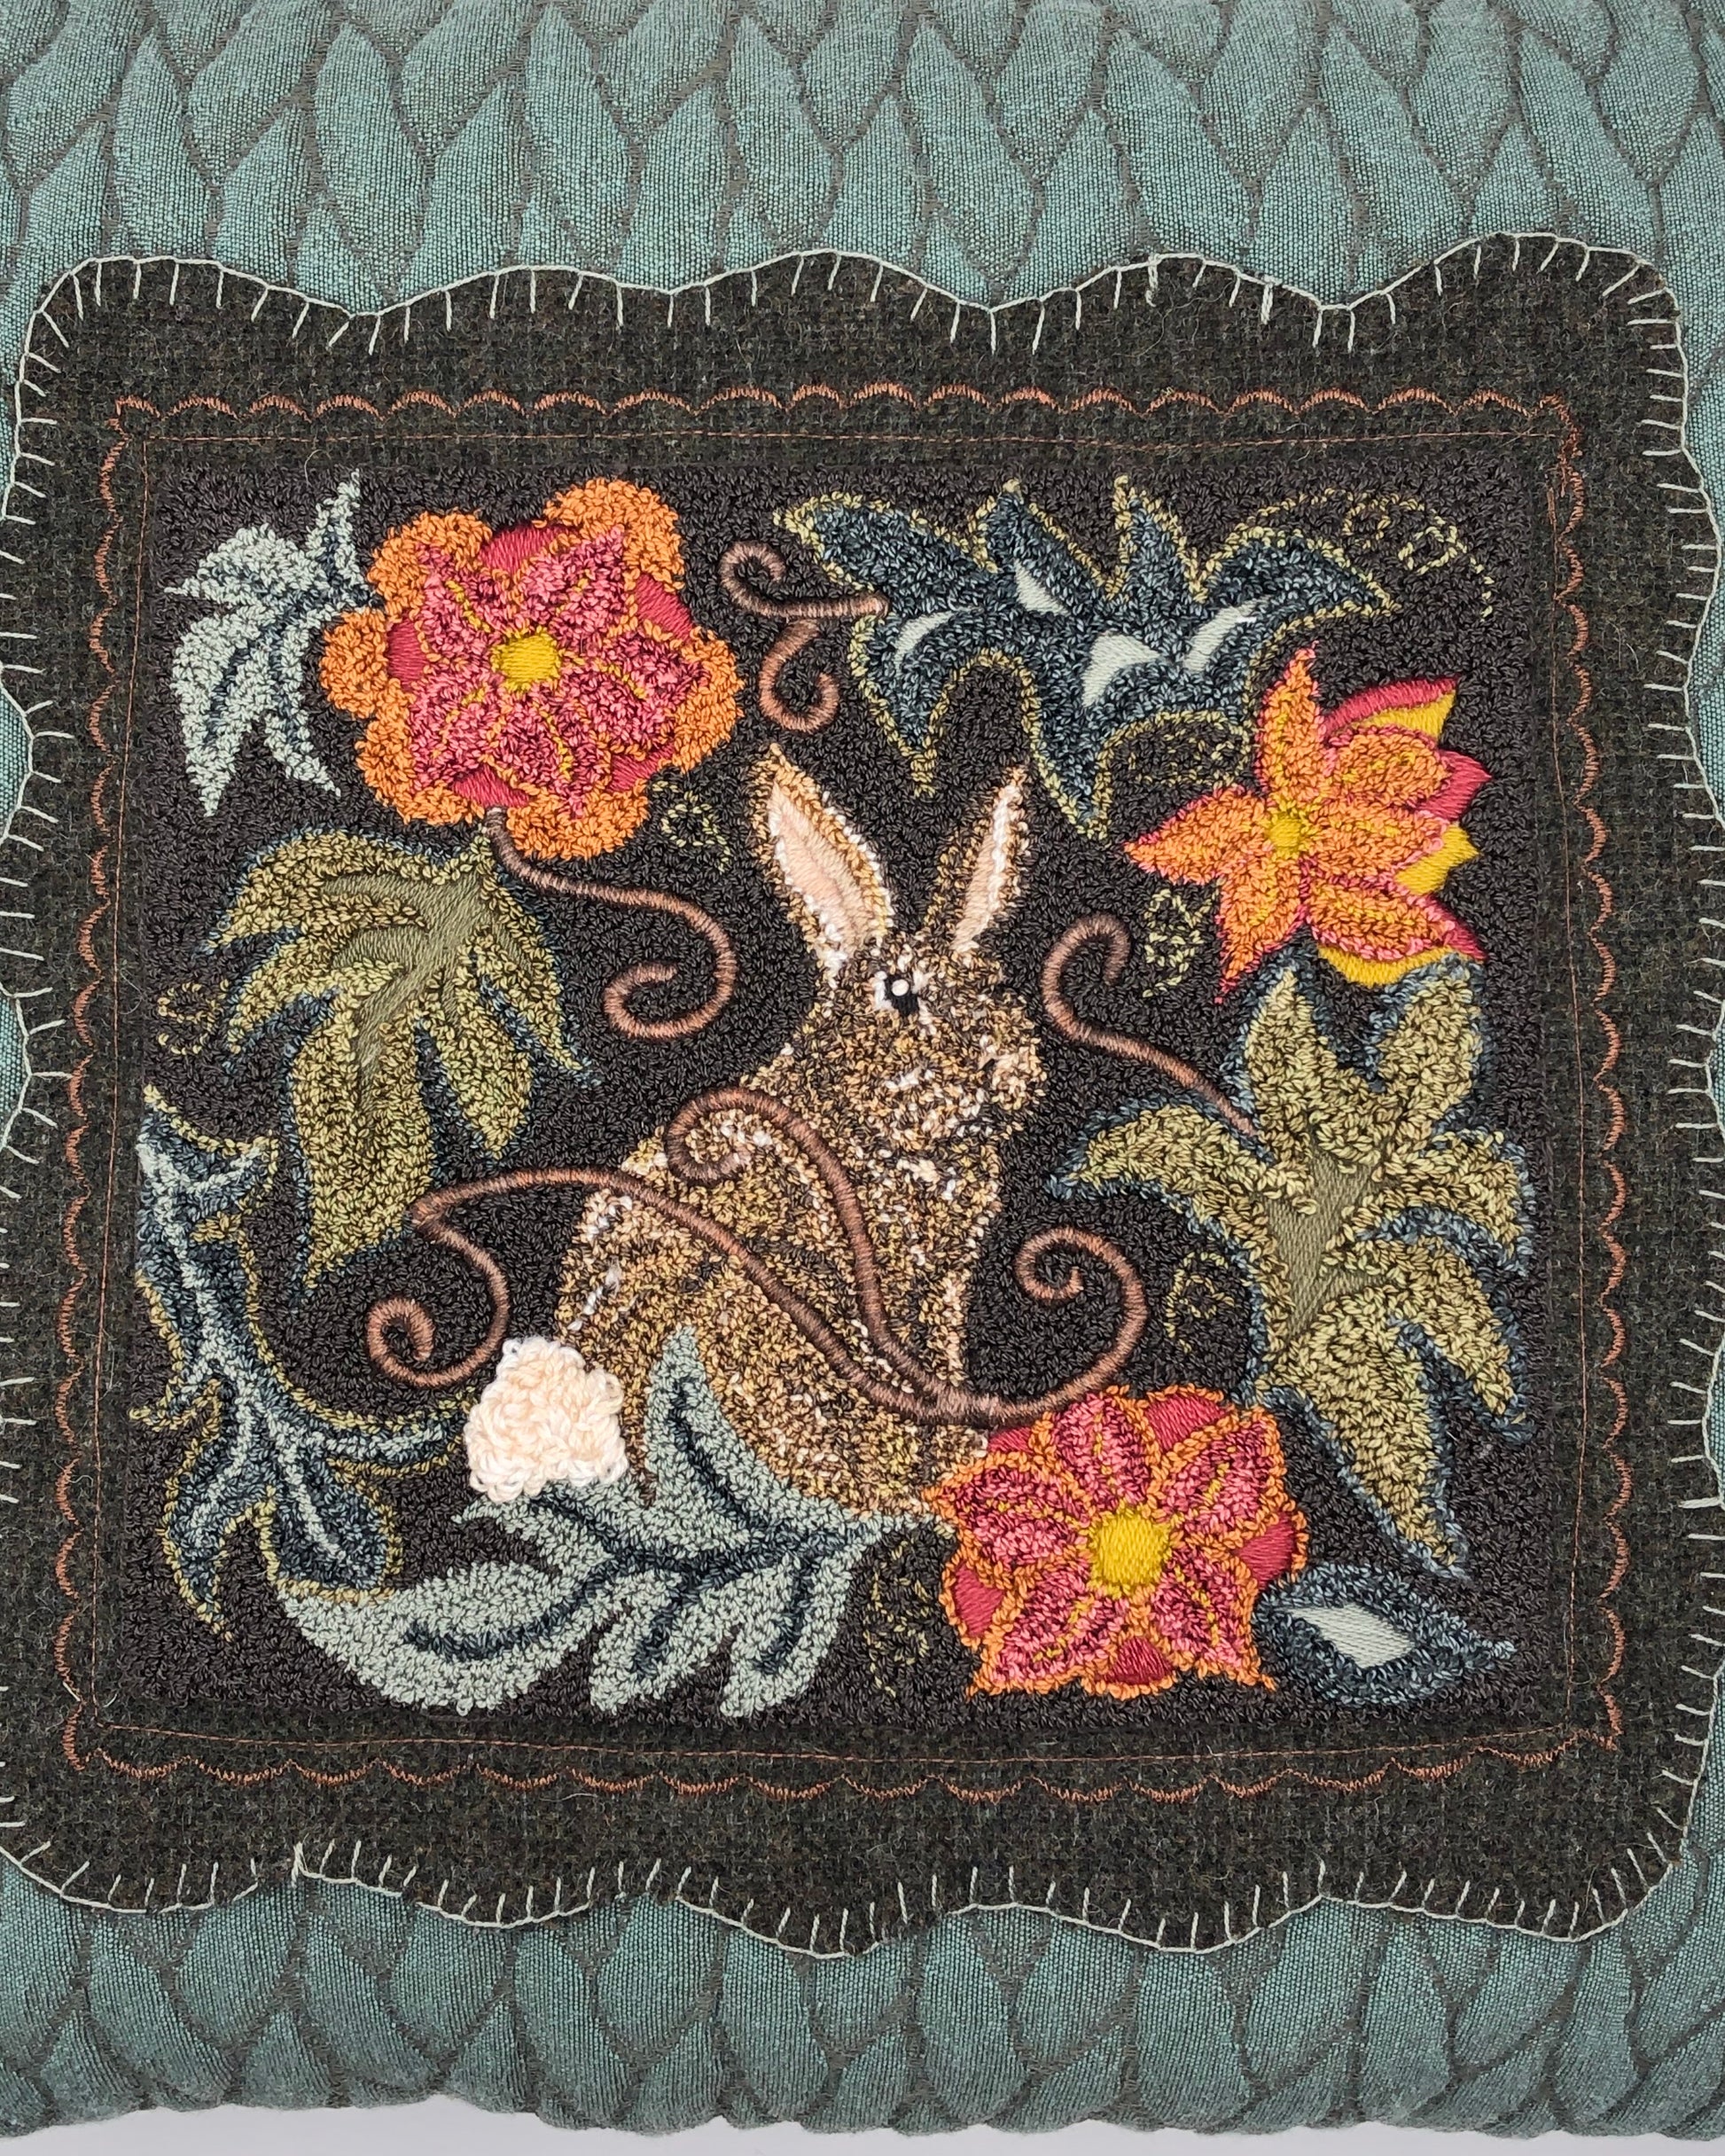 Garden Rabbit Punch Needle pattern by Orphaned Wool. Design can be finished using Valdani Threads or Dmc Floss. Beautiful Garden Rabbit pattern with flowers and leaves. A lovely pillow design.